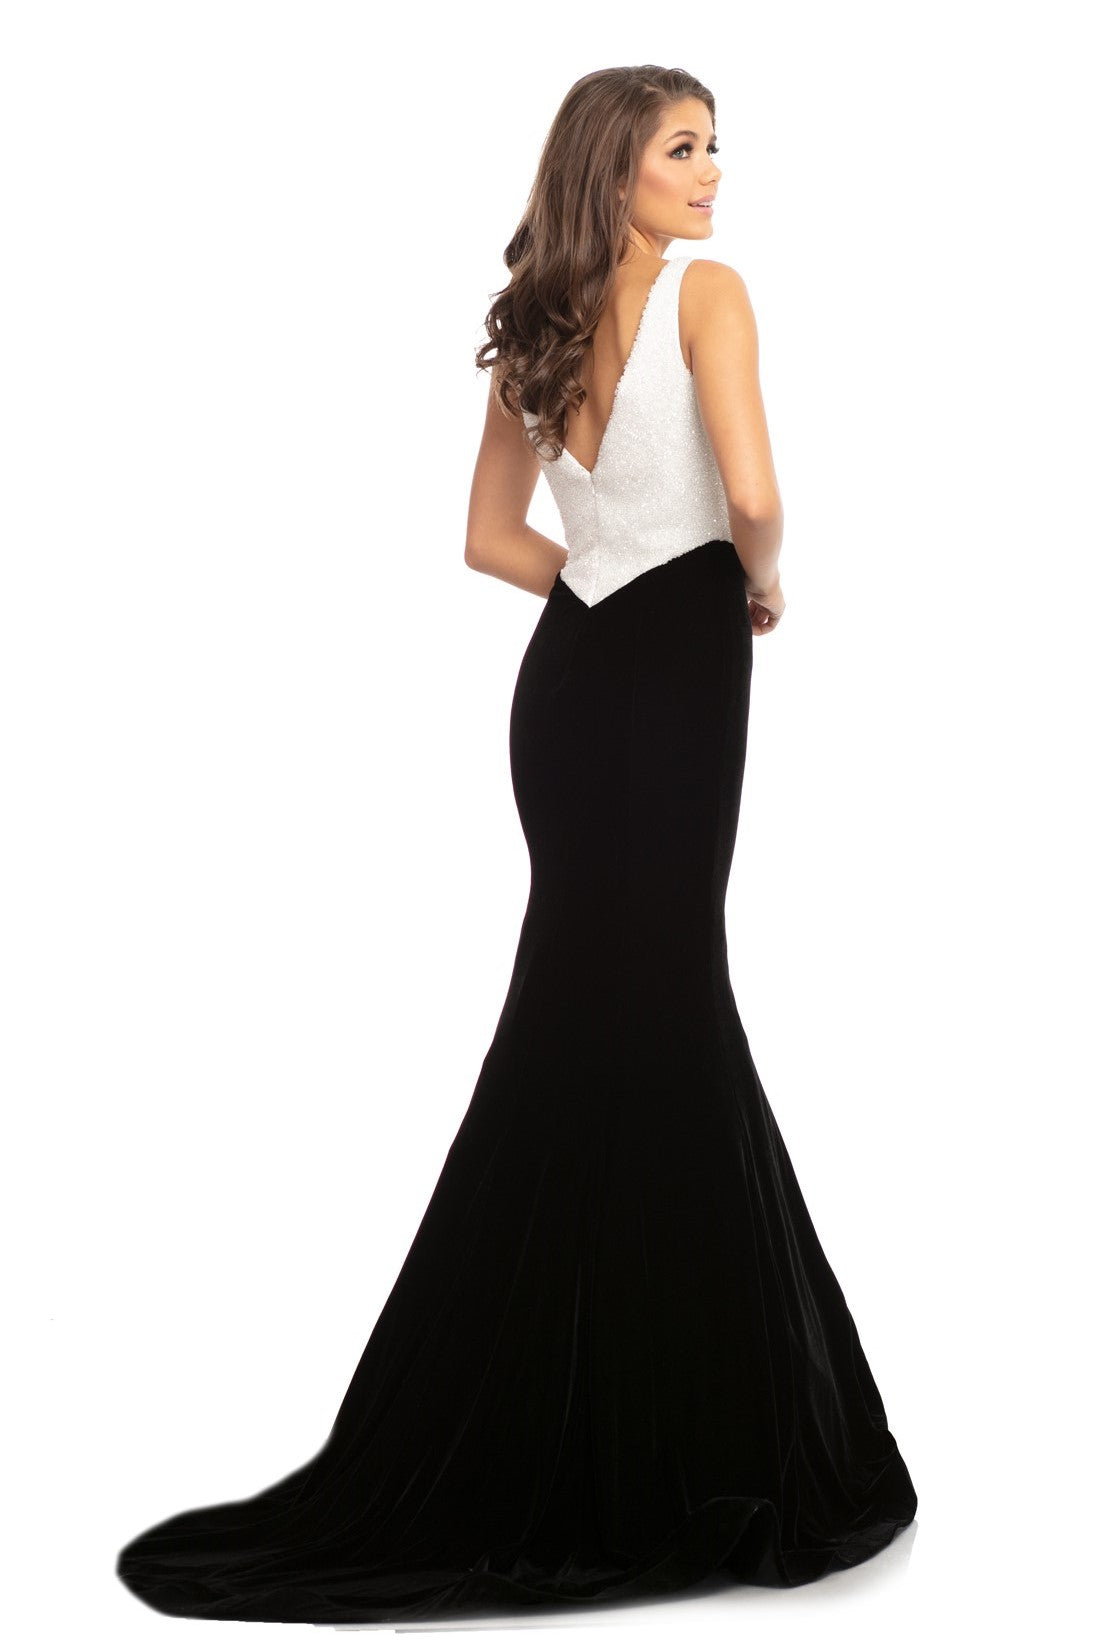 Johnathan Kayne 9019 is a velvet mermaid Prom Dress Pageant Gown & Formal Evening Wear. Long fitted mermaid silhouette with a basque waistline. Fully Embellished bodice is covered in crystal studs and beading. Plunging neckline with mesh insert.